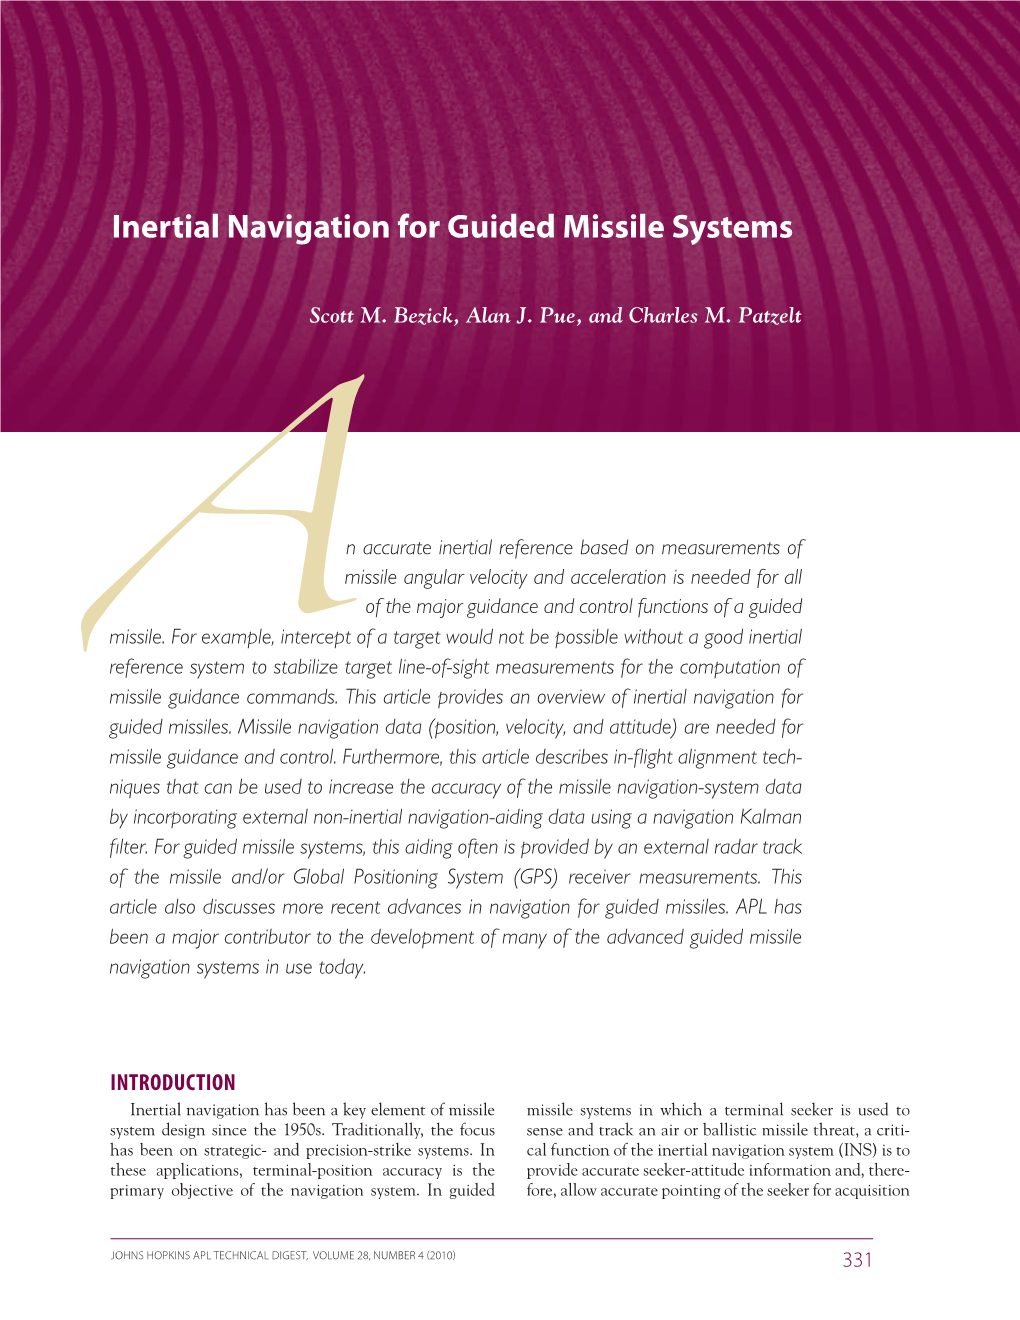 Inertial Navigation for Guided Missile Systems